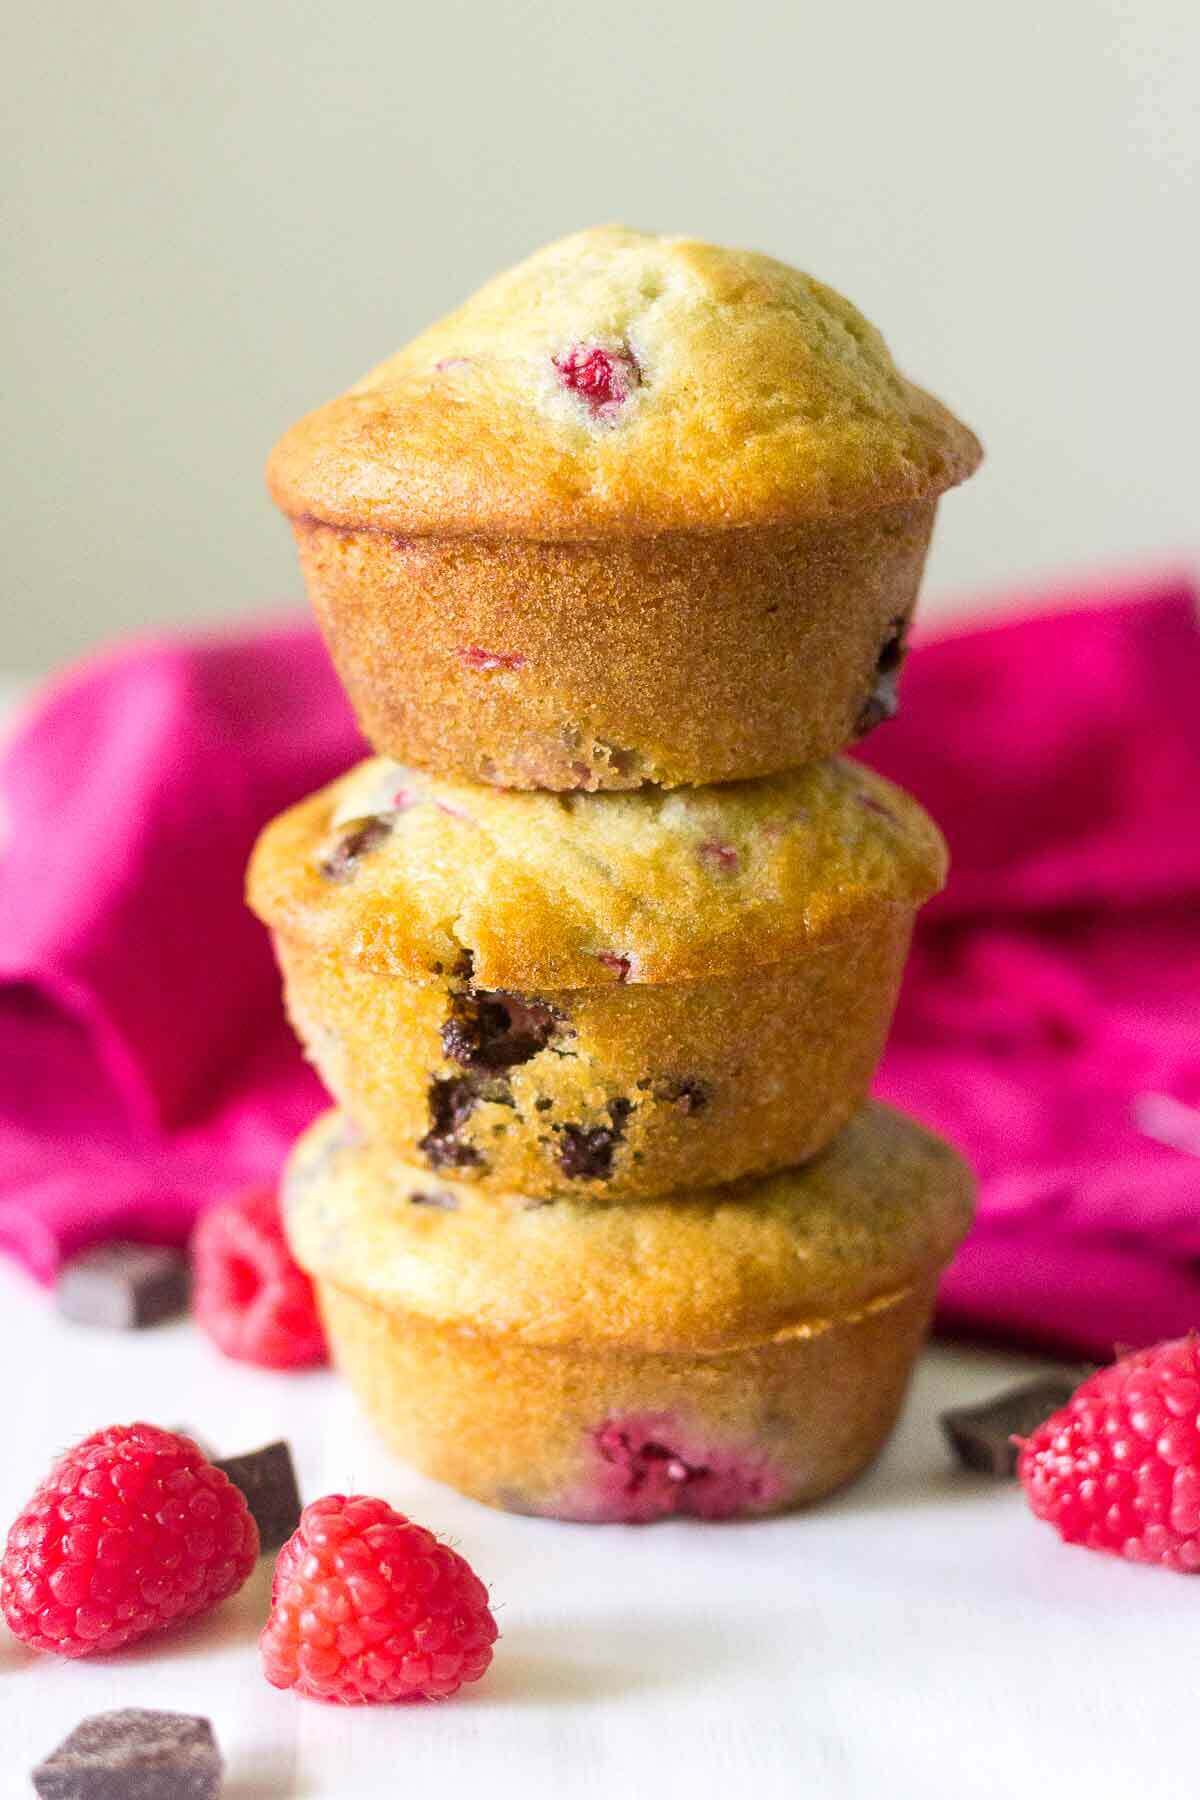 Soft and buttery muffins packed full of yummy ingredients! These Raspberry Chocolate Chunk Muffins will make your next Monday mornings the best yet. The melty chocolate oozes with each bite and the raspberries burst with flavor.